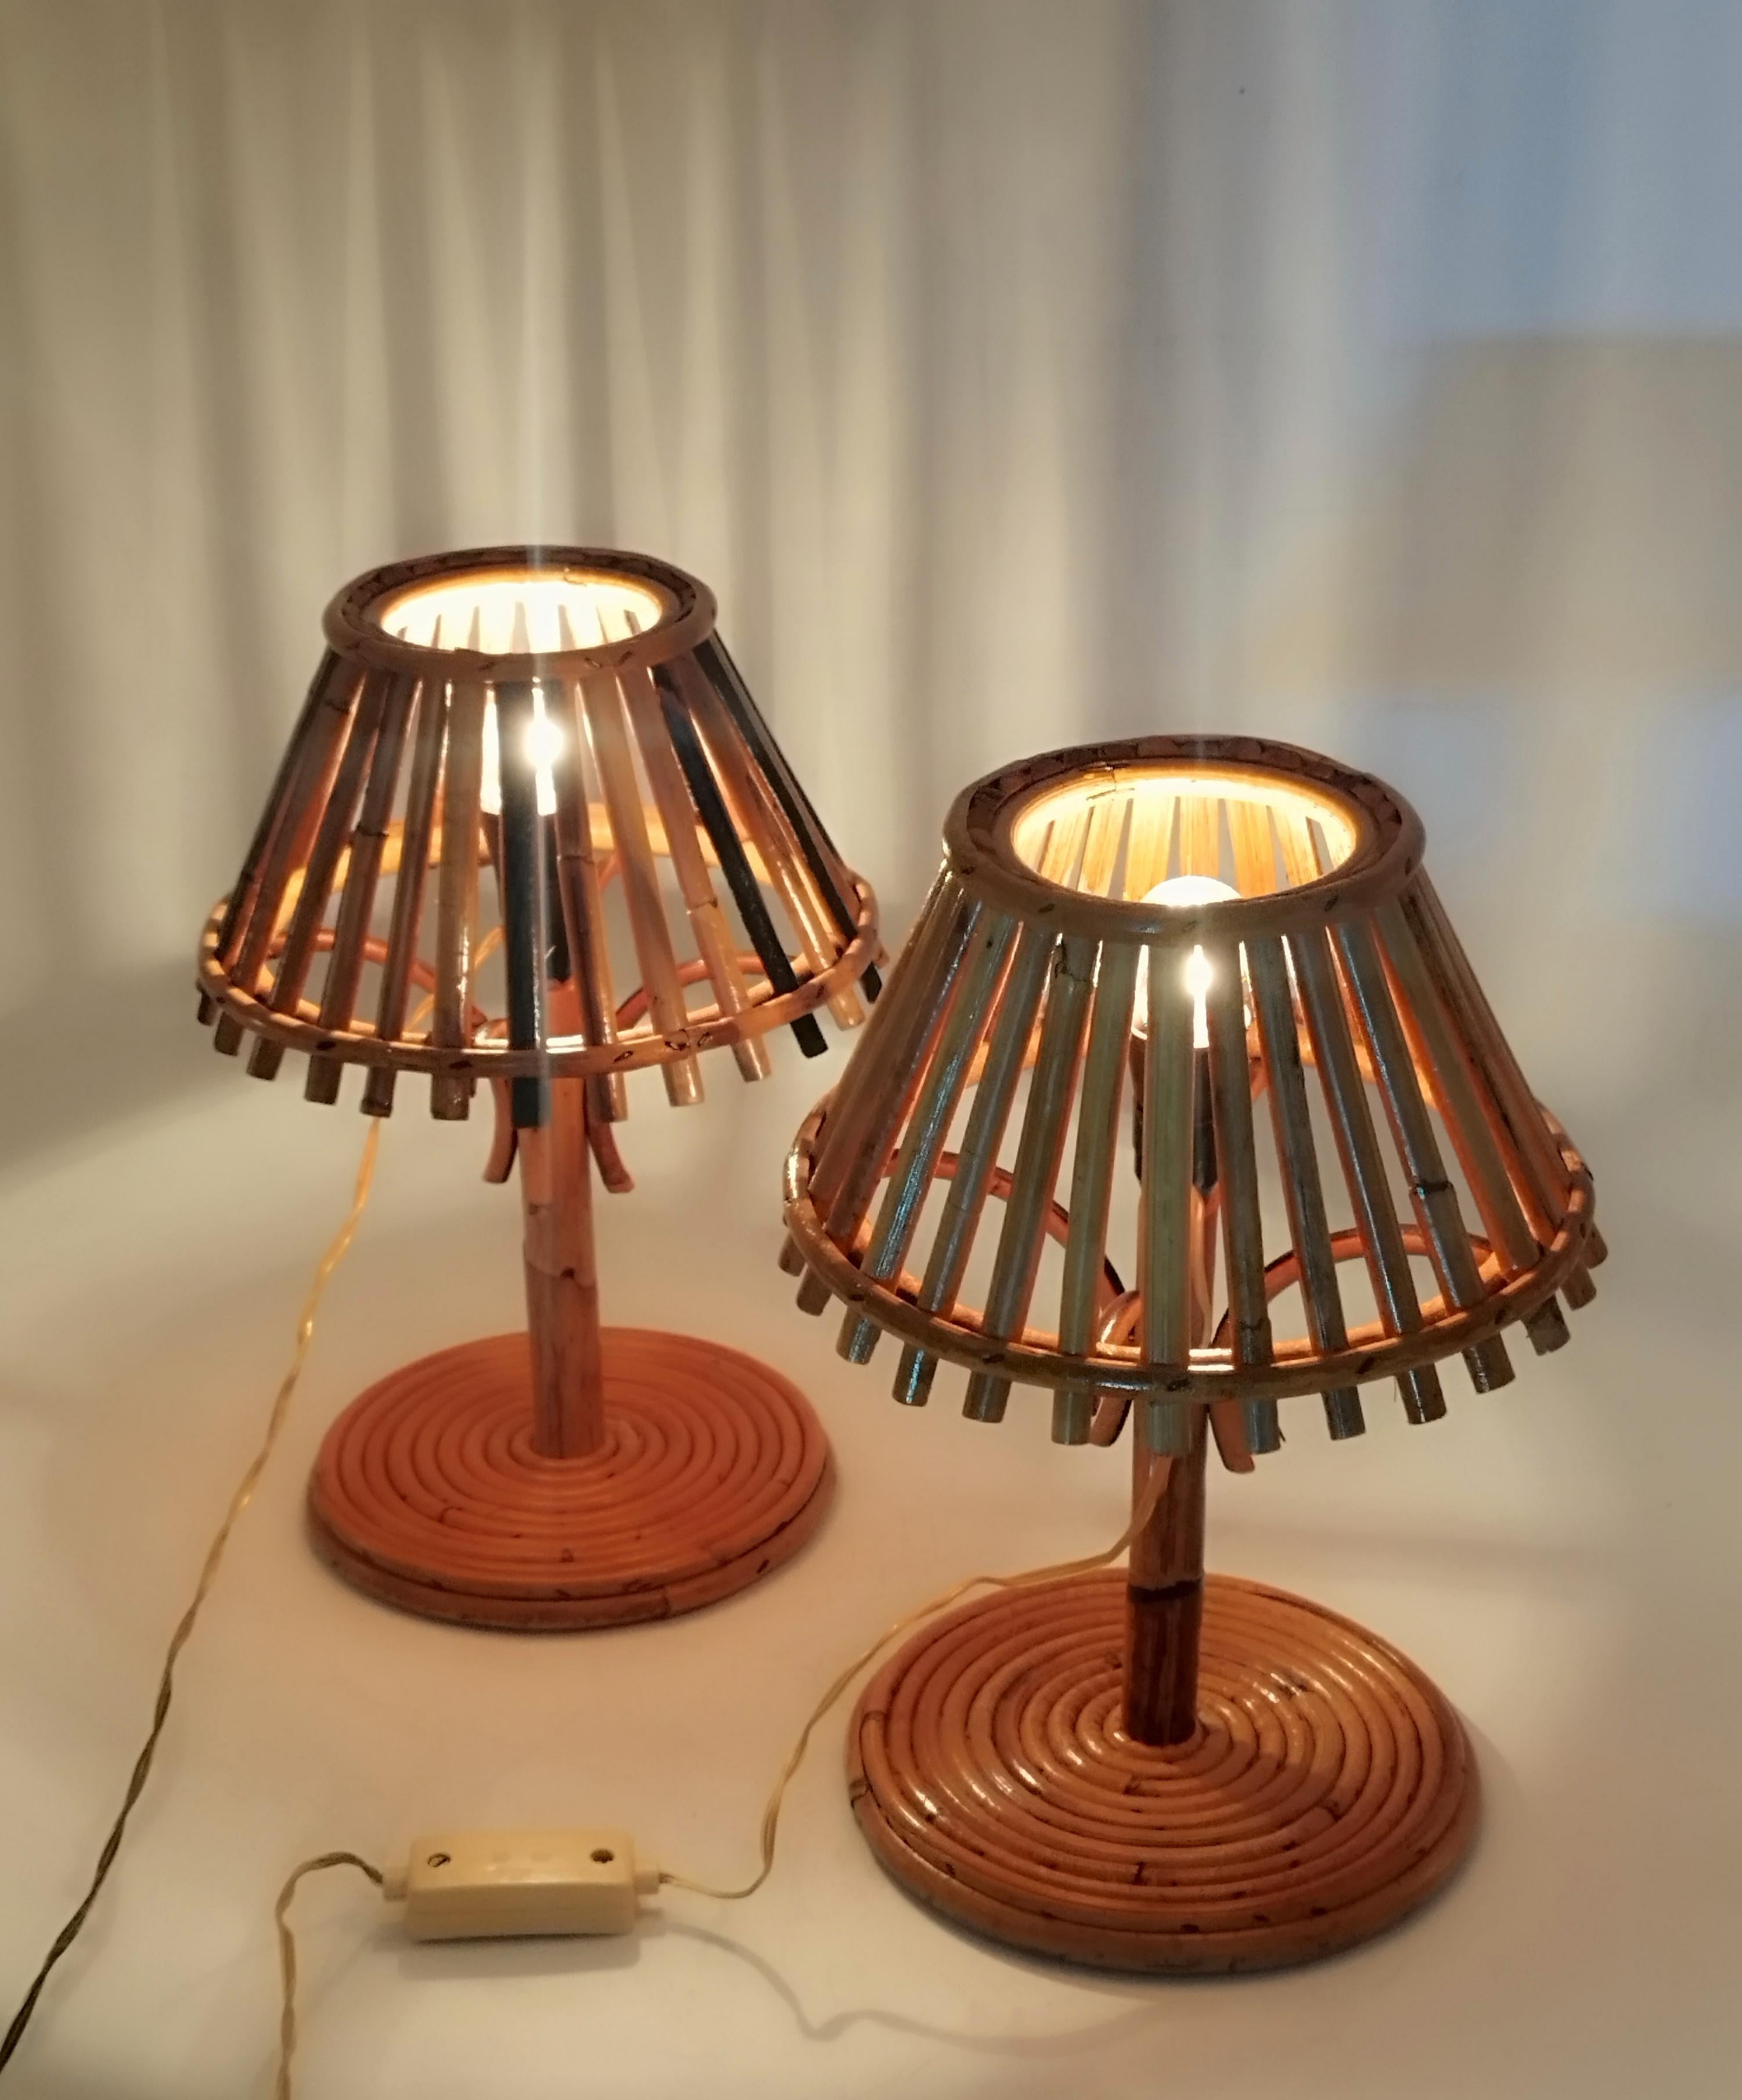 Mid-20th Century Pair of Rattan and Bamboo Table Lamps, Italy, 1960s For Sale